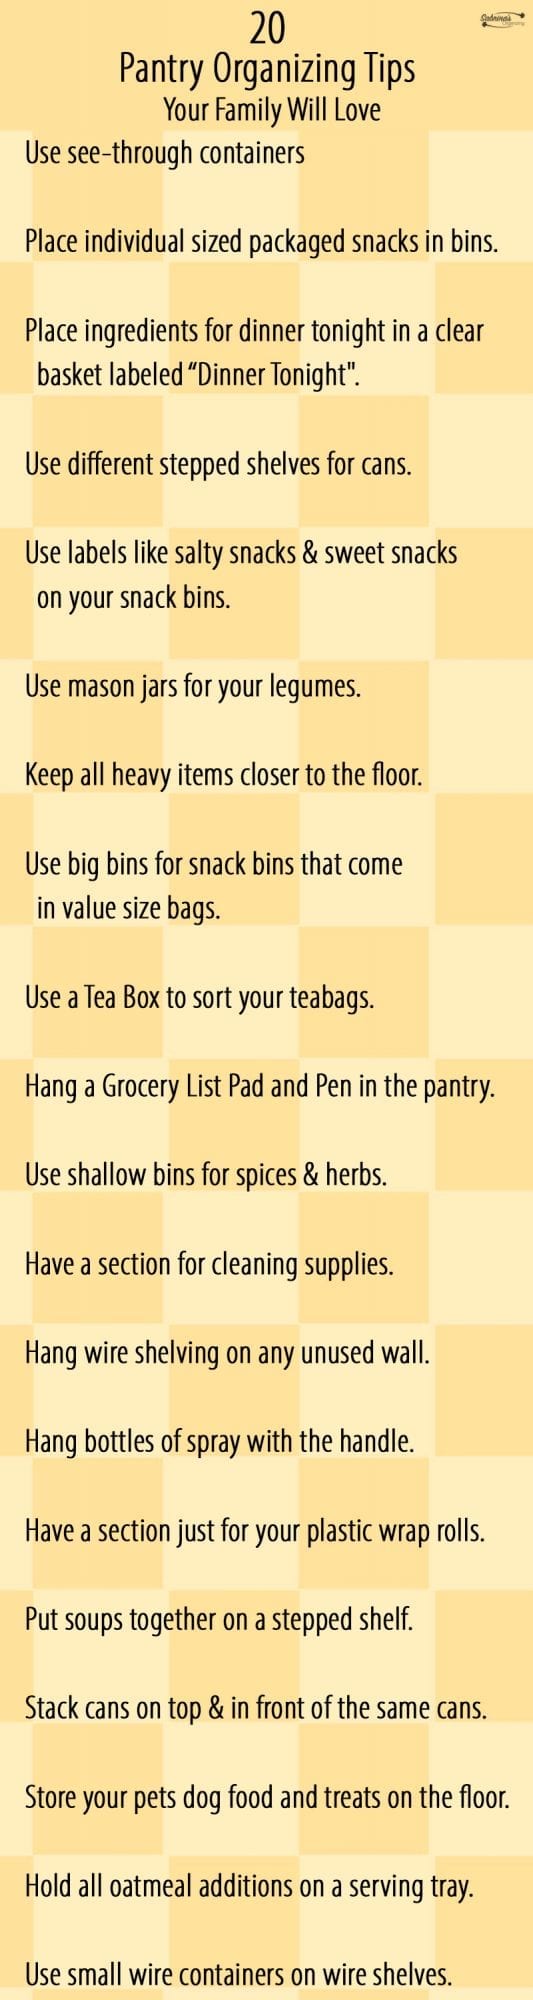 Top 20 Pantry Organizing Tips Your Family Will Love